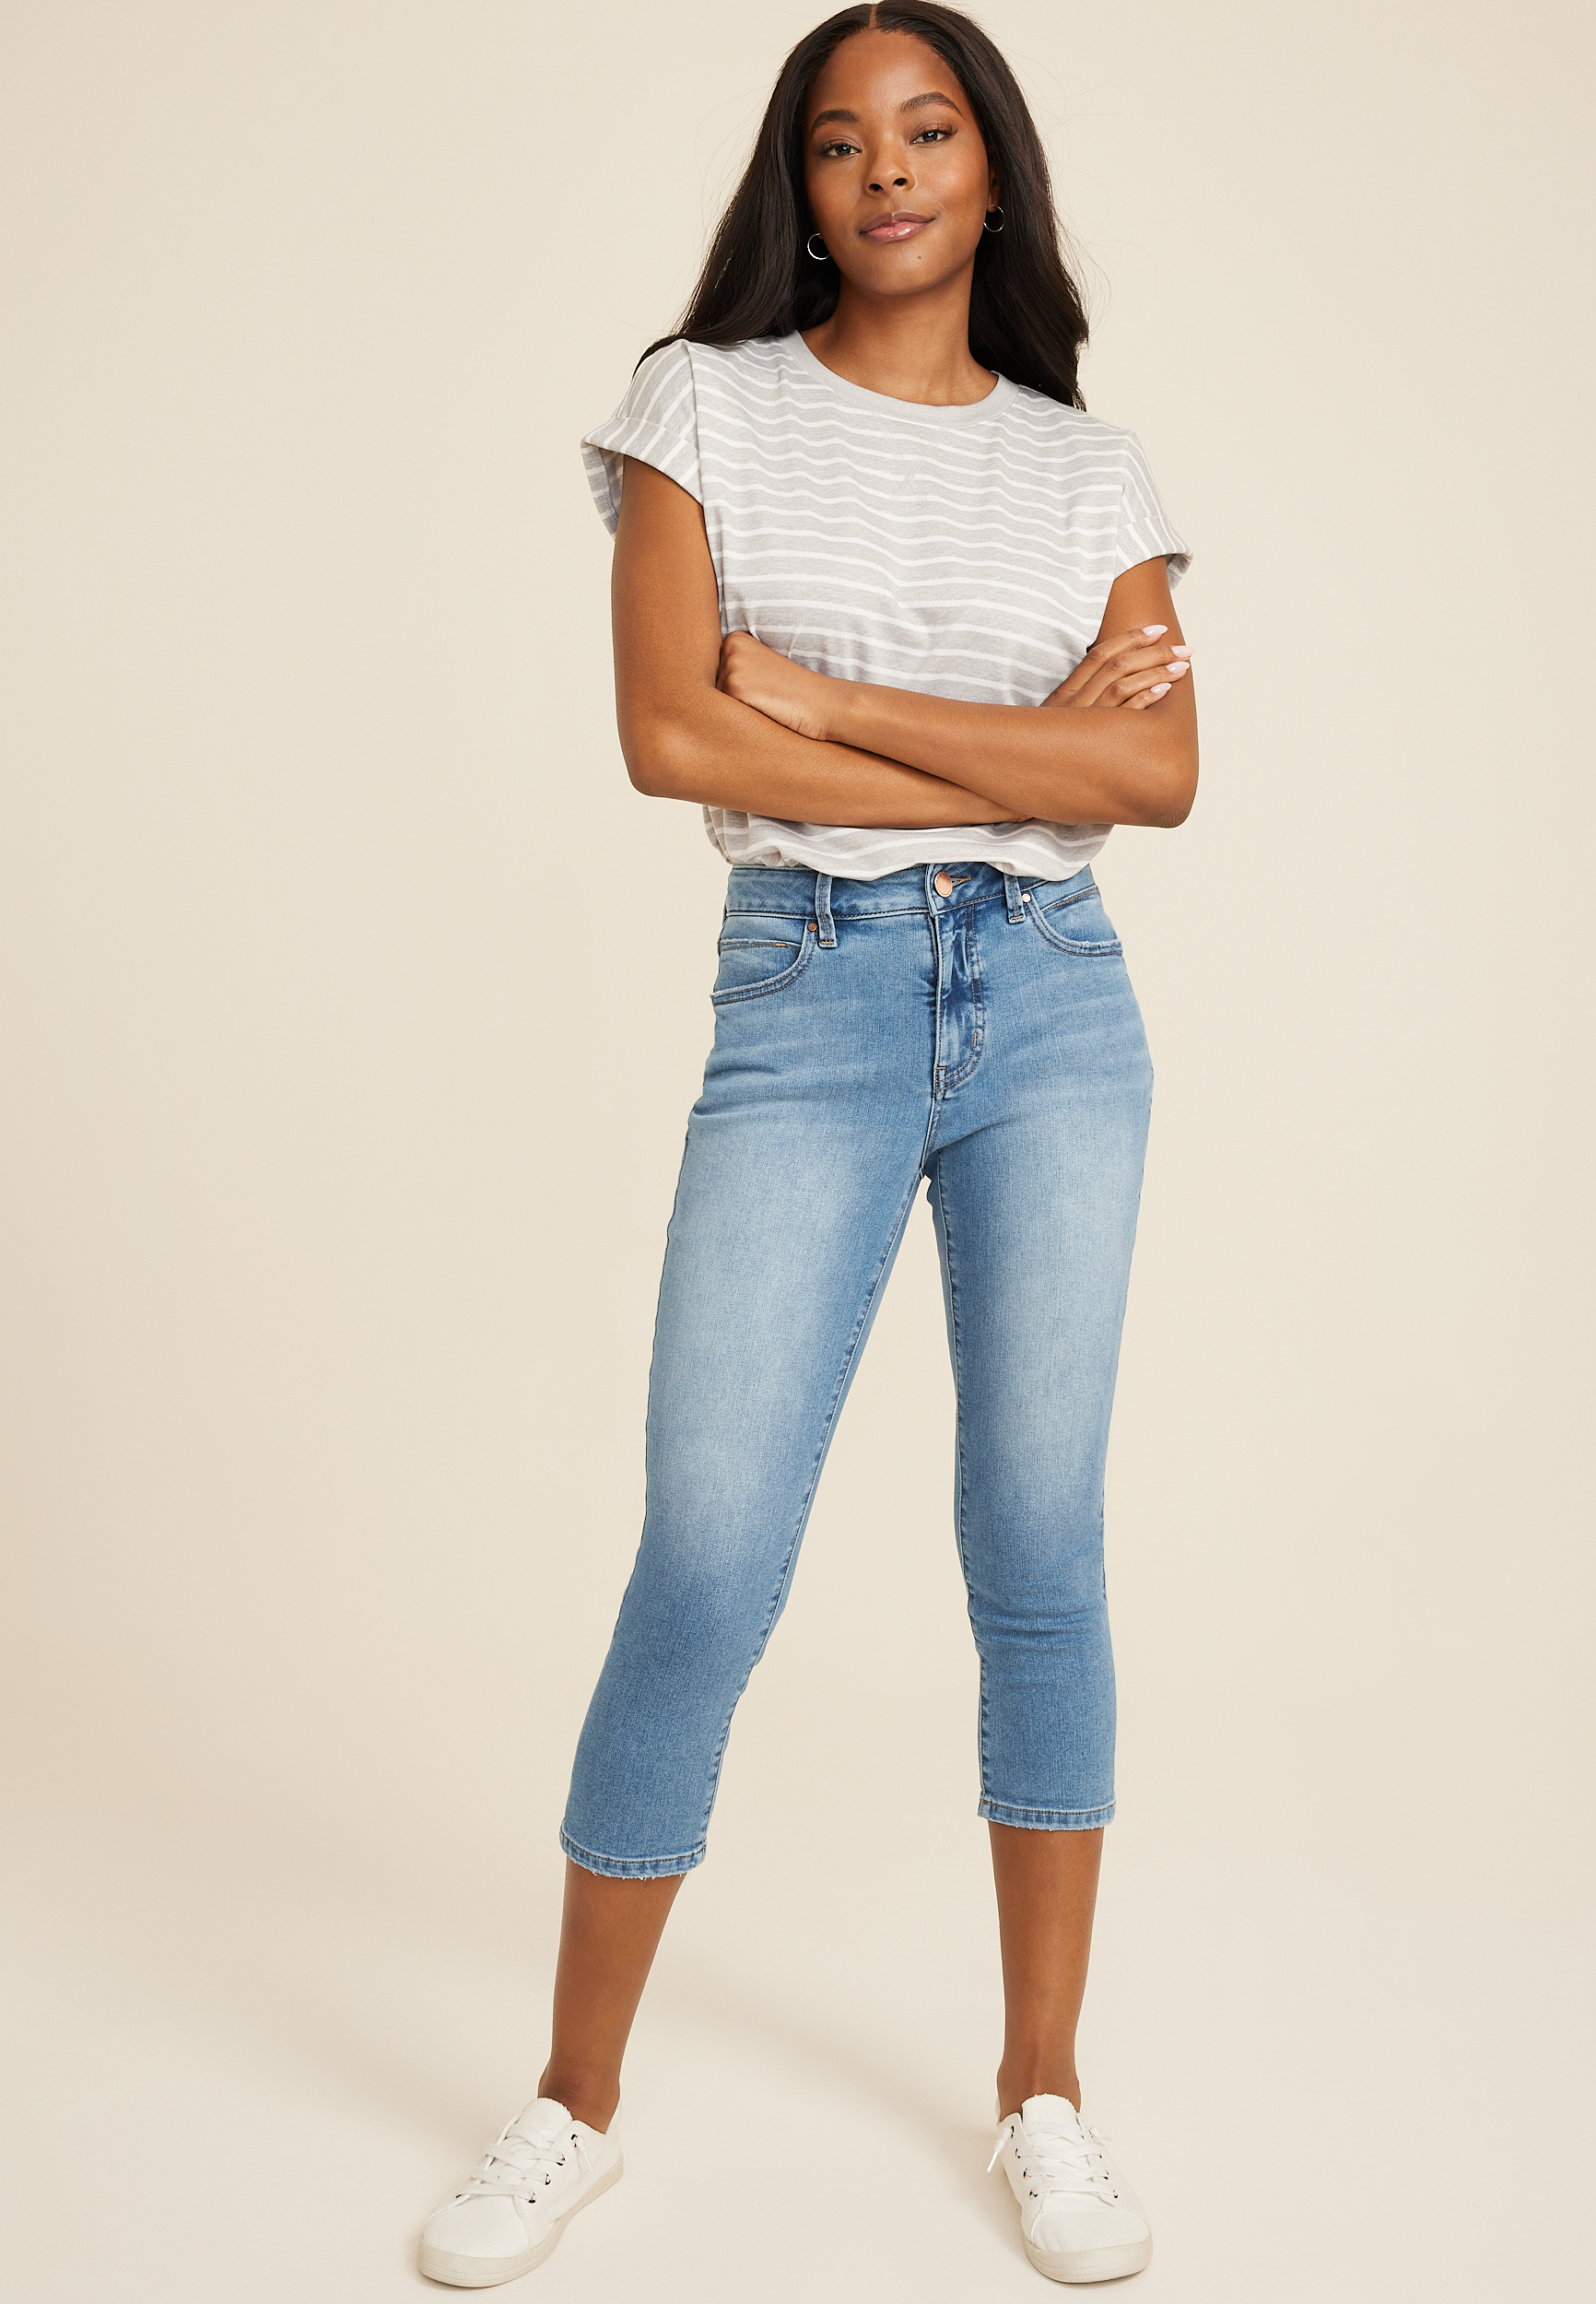 m jeans by maurices™ Everflex™ High Rise Super Skinny Cropped Jean ...